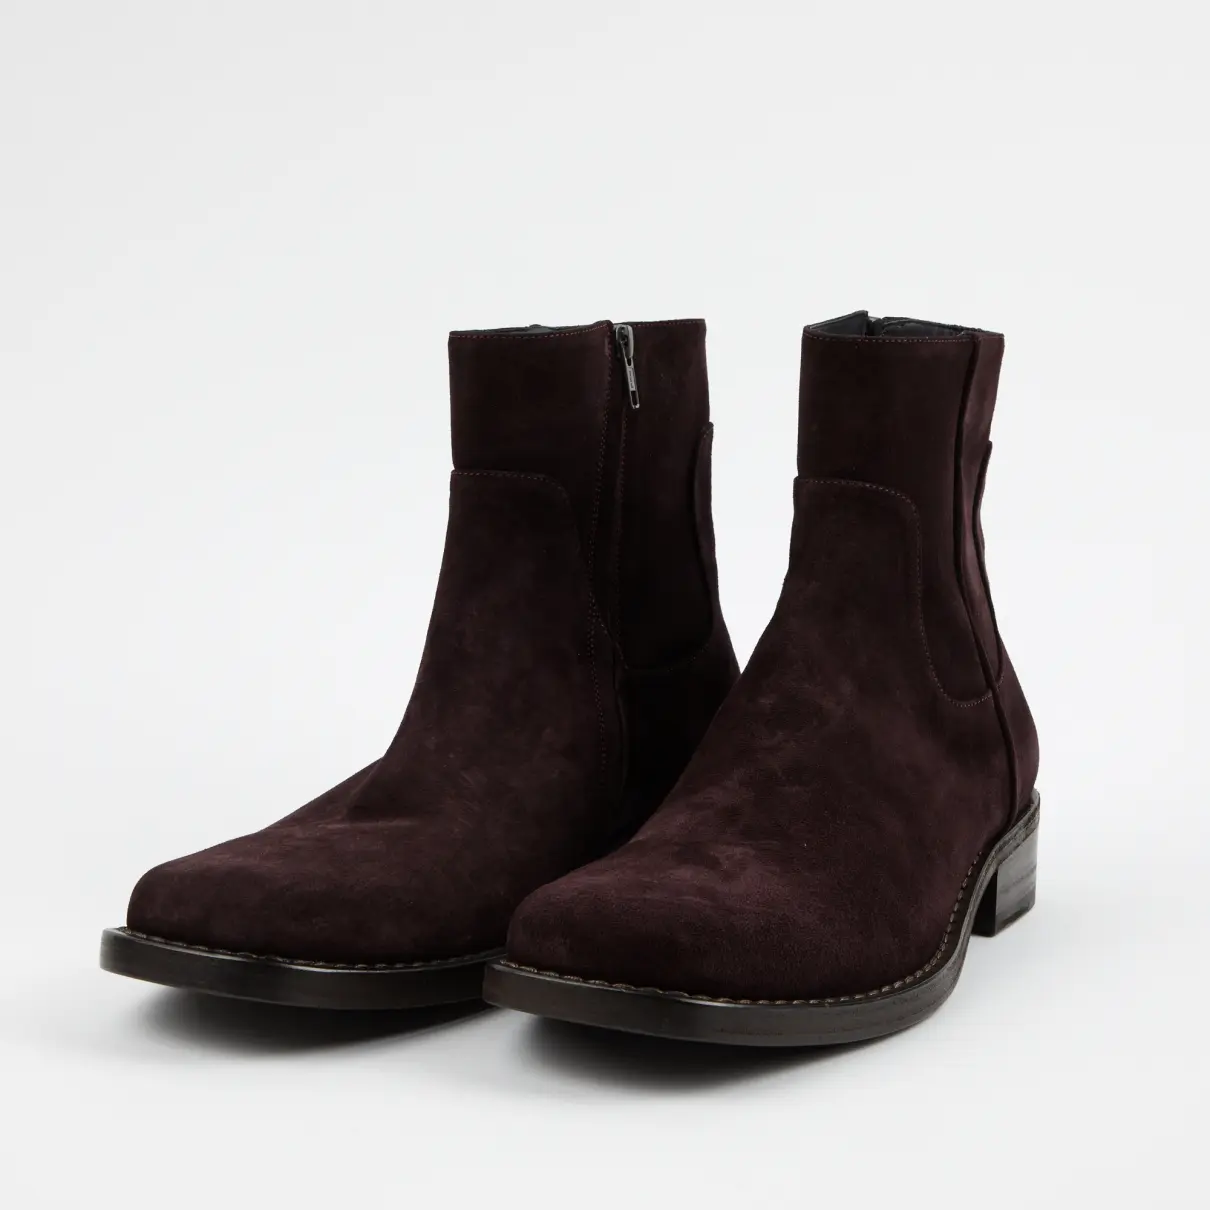 Buy Raf Simons Brown Suede Boots online